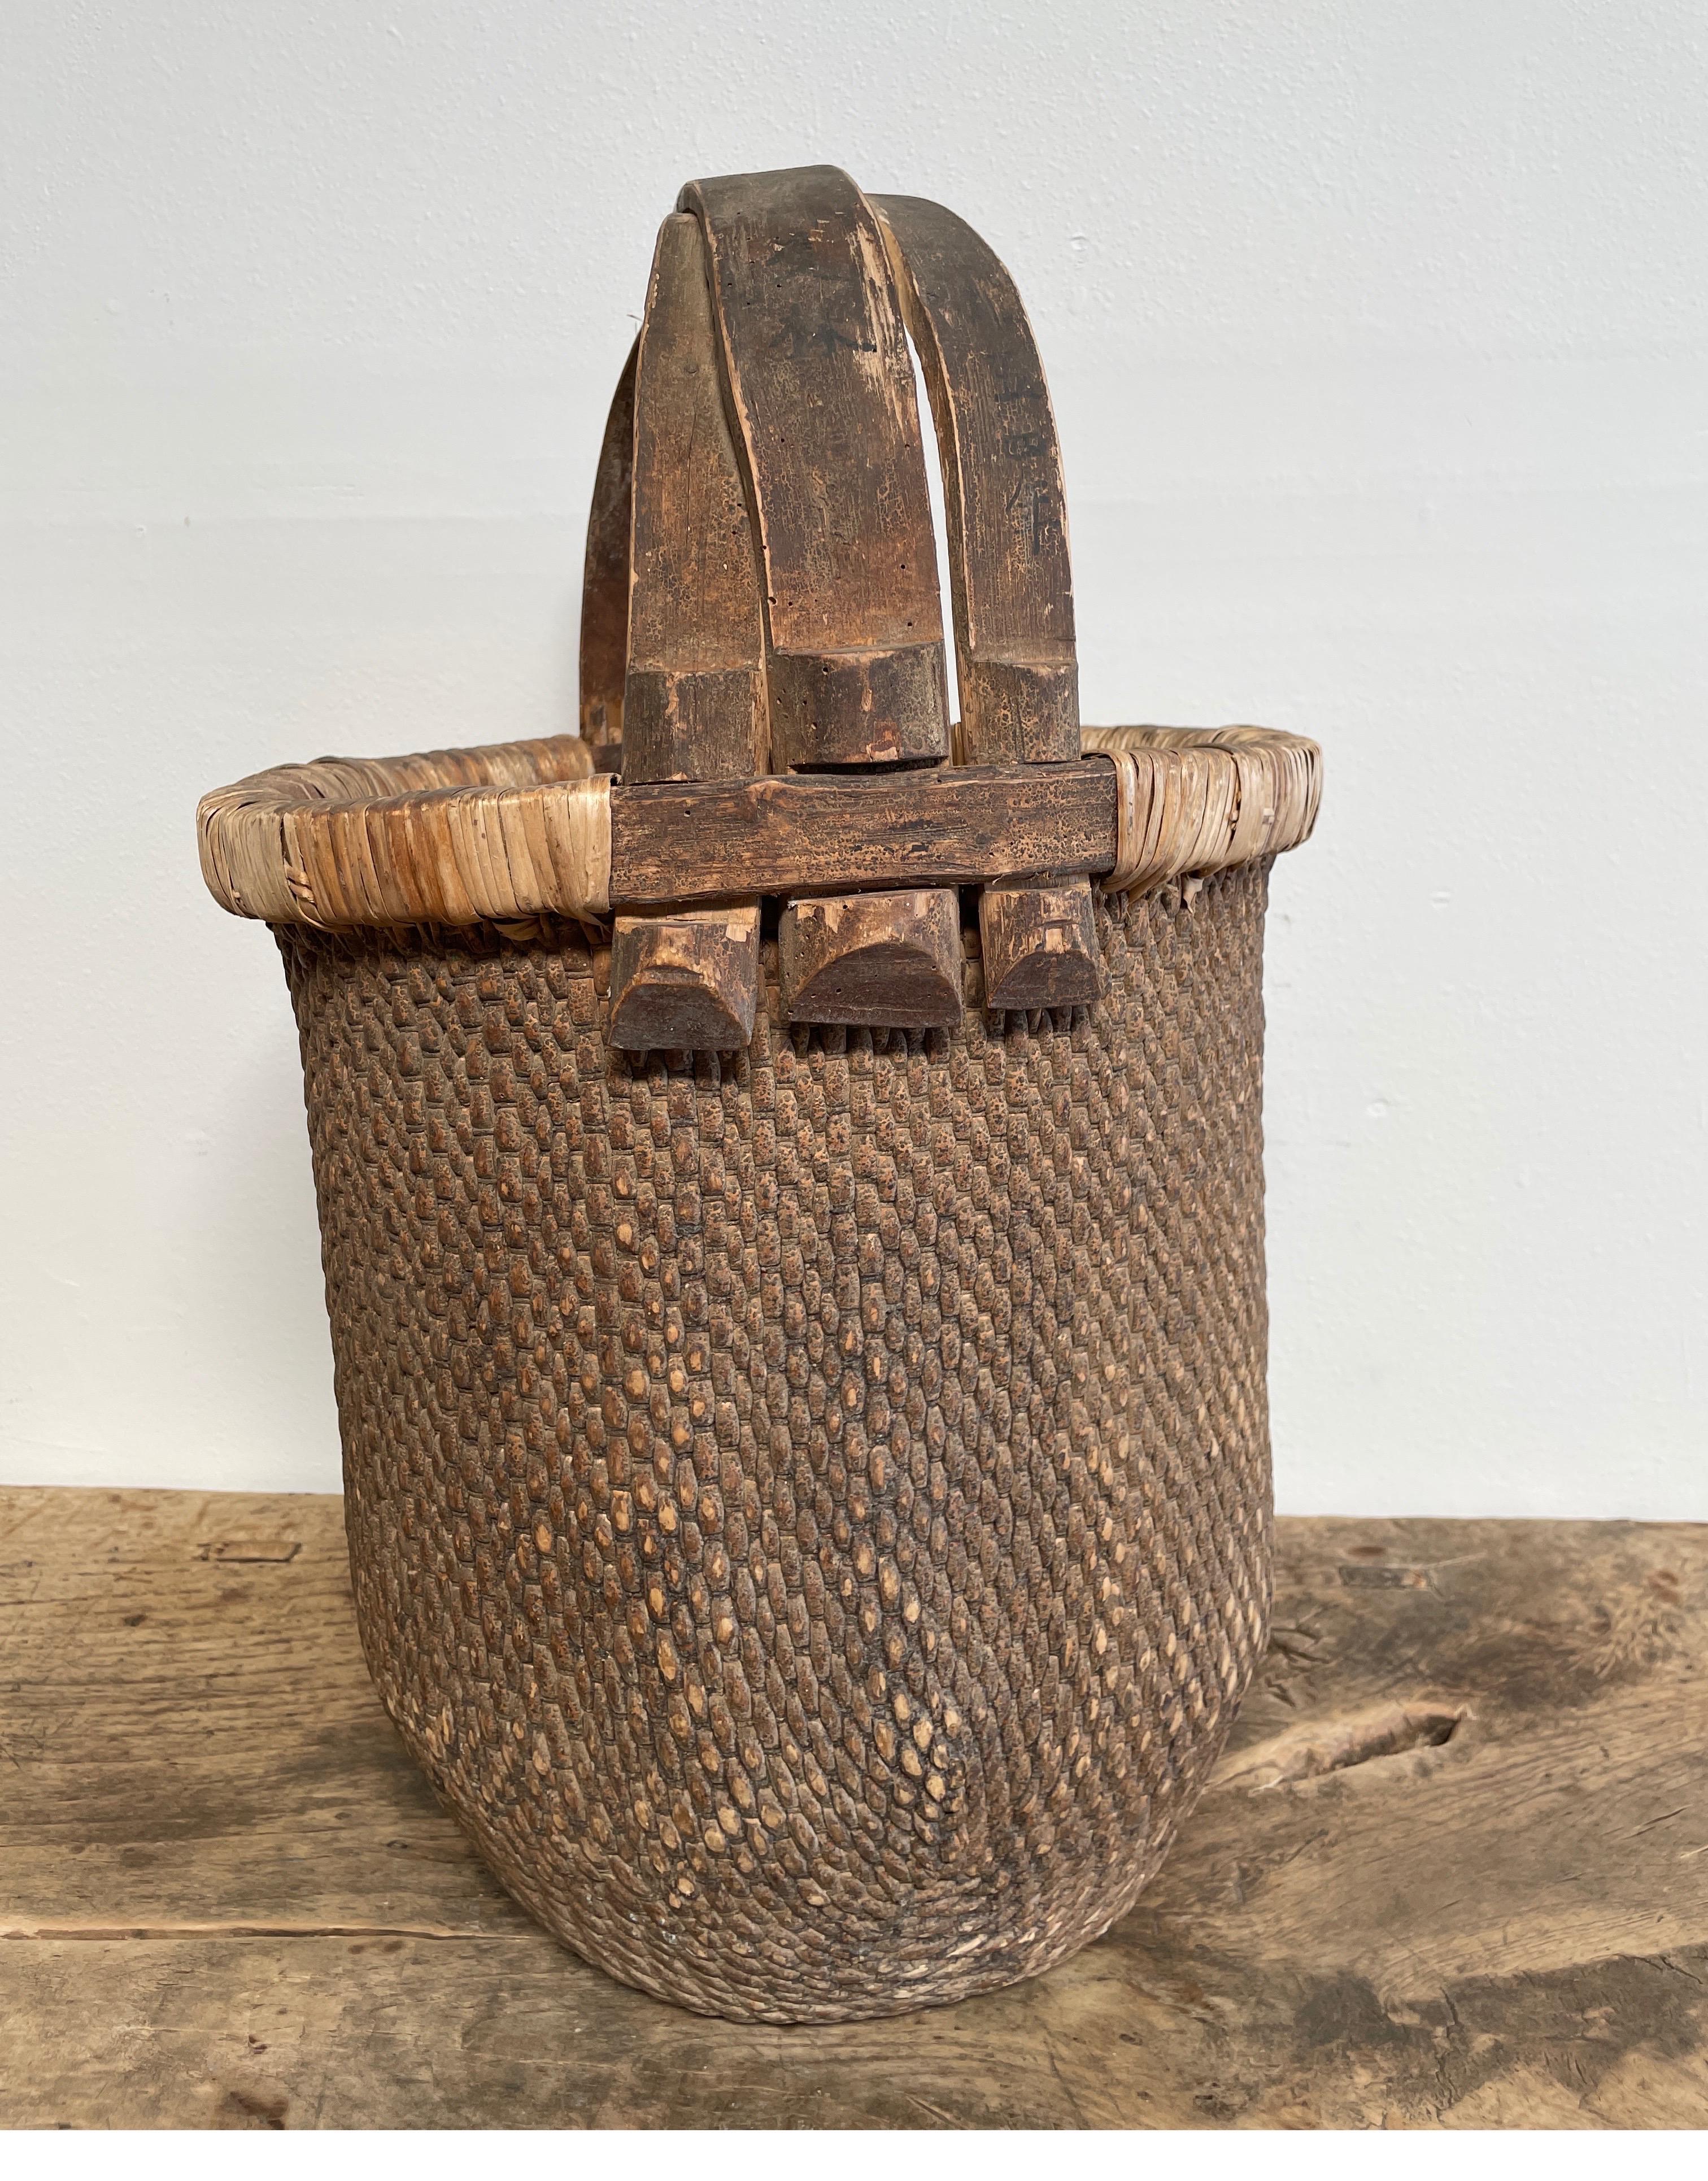 Vintage woven wicker basket with handle
Size: 16” x 16” x 24”.